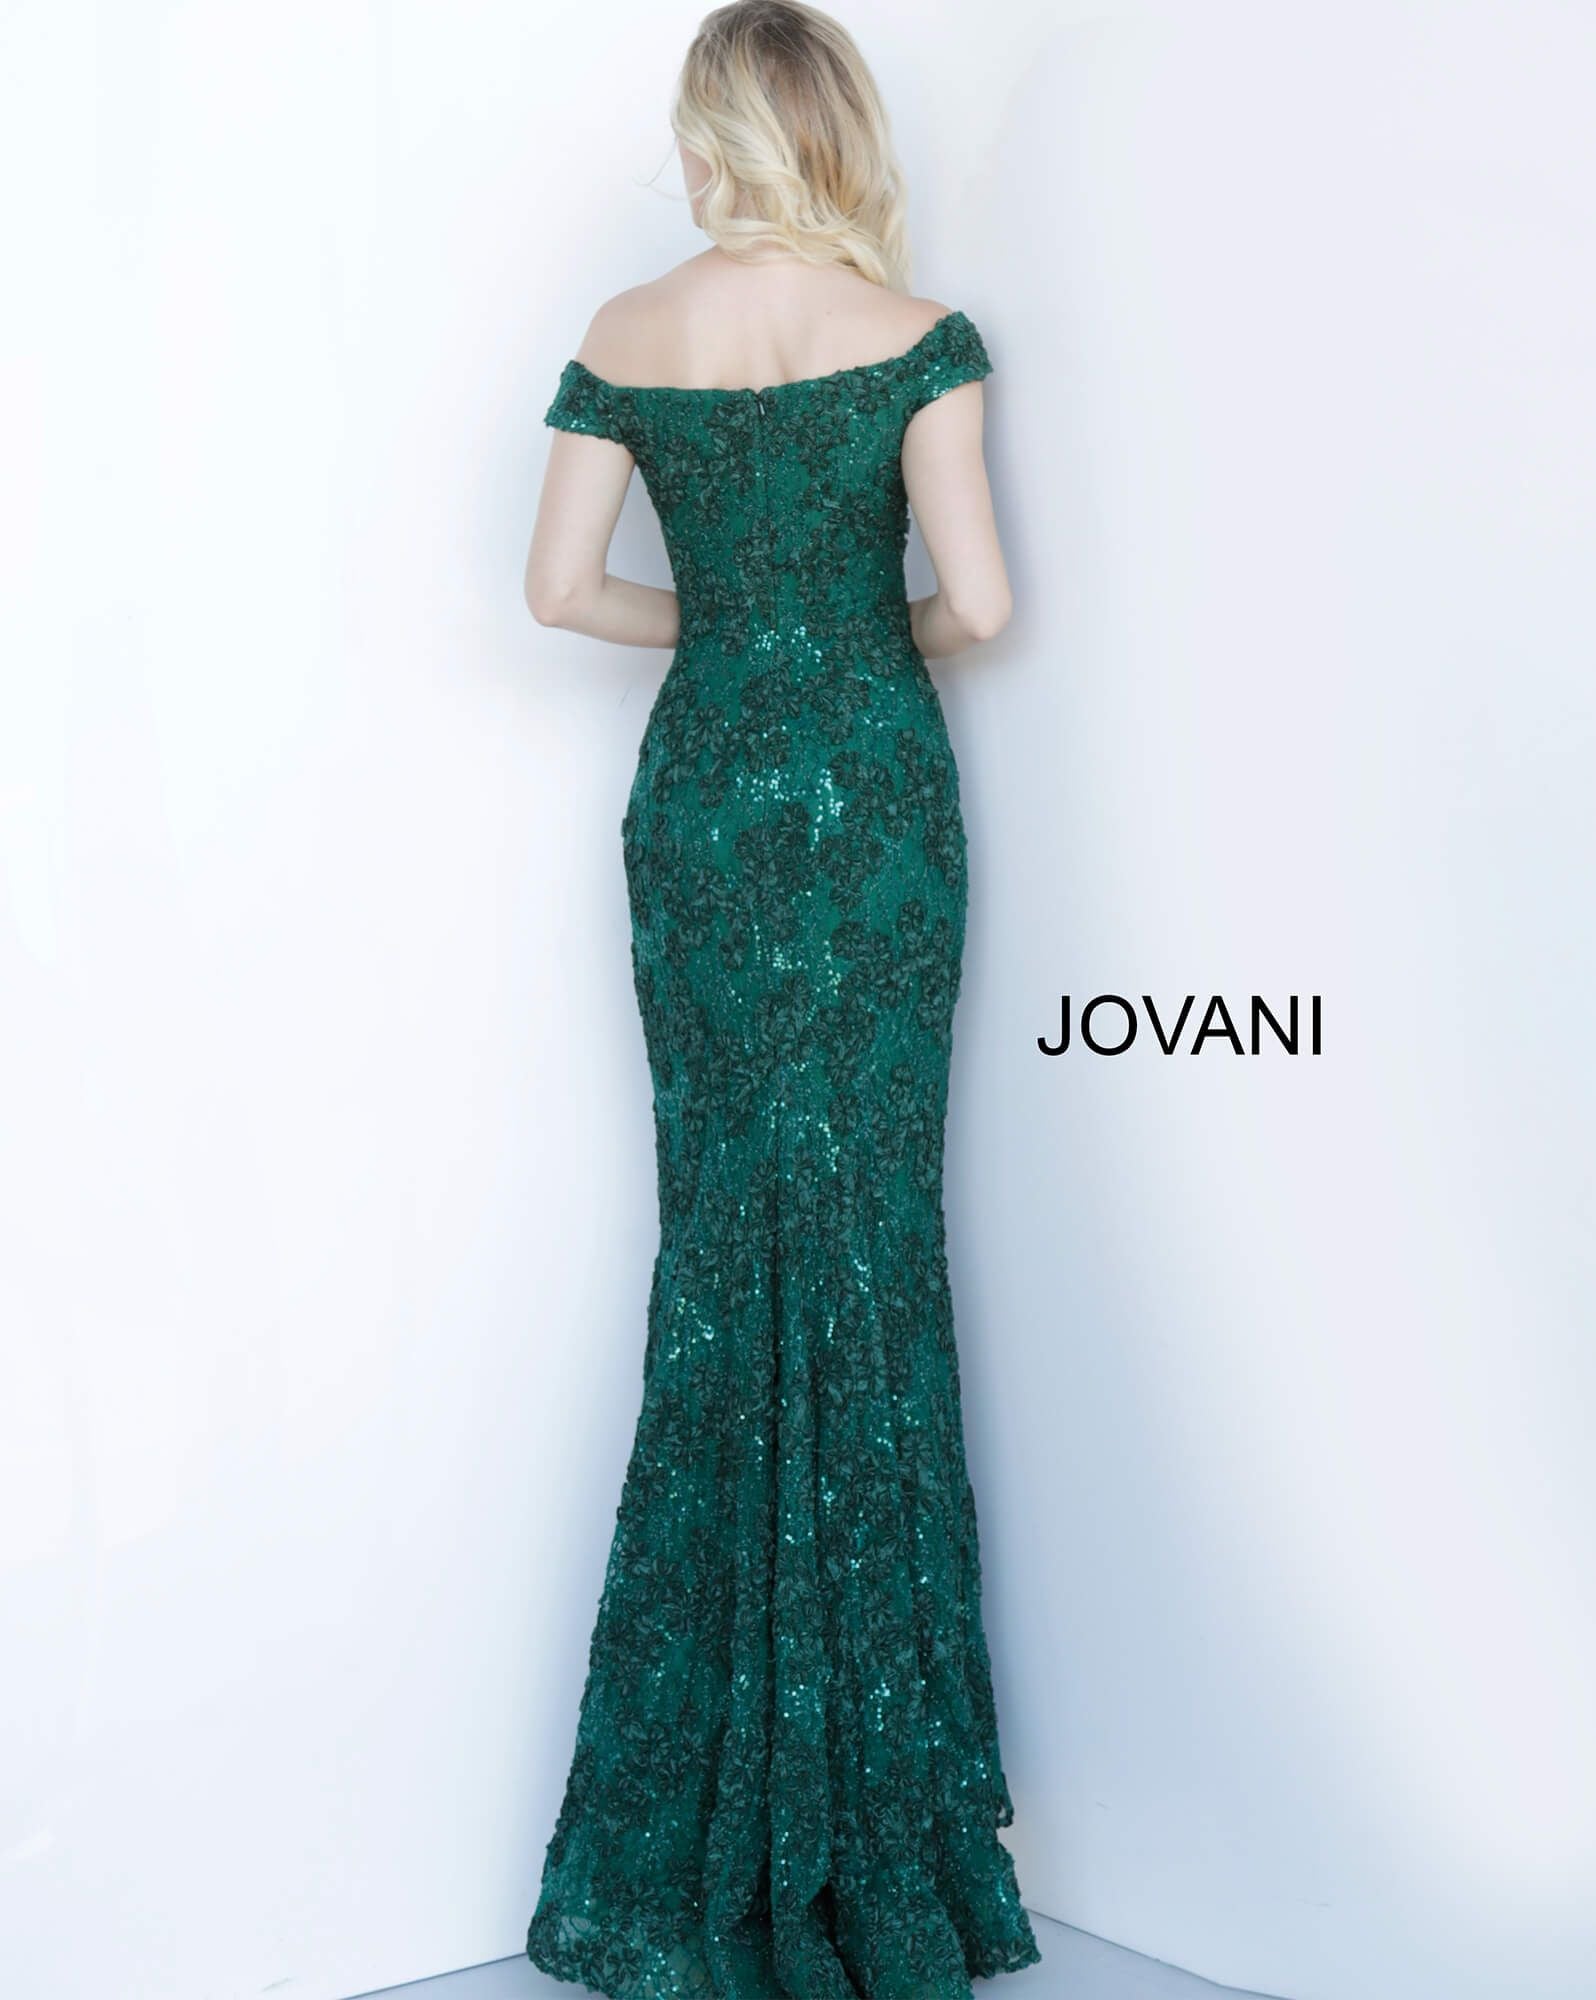 Jovani 1910 off the shoulder embellished evening gown  Available colors:  Black, Emerald, Plum, Red  Available sizes:  00-24 